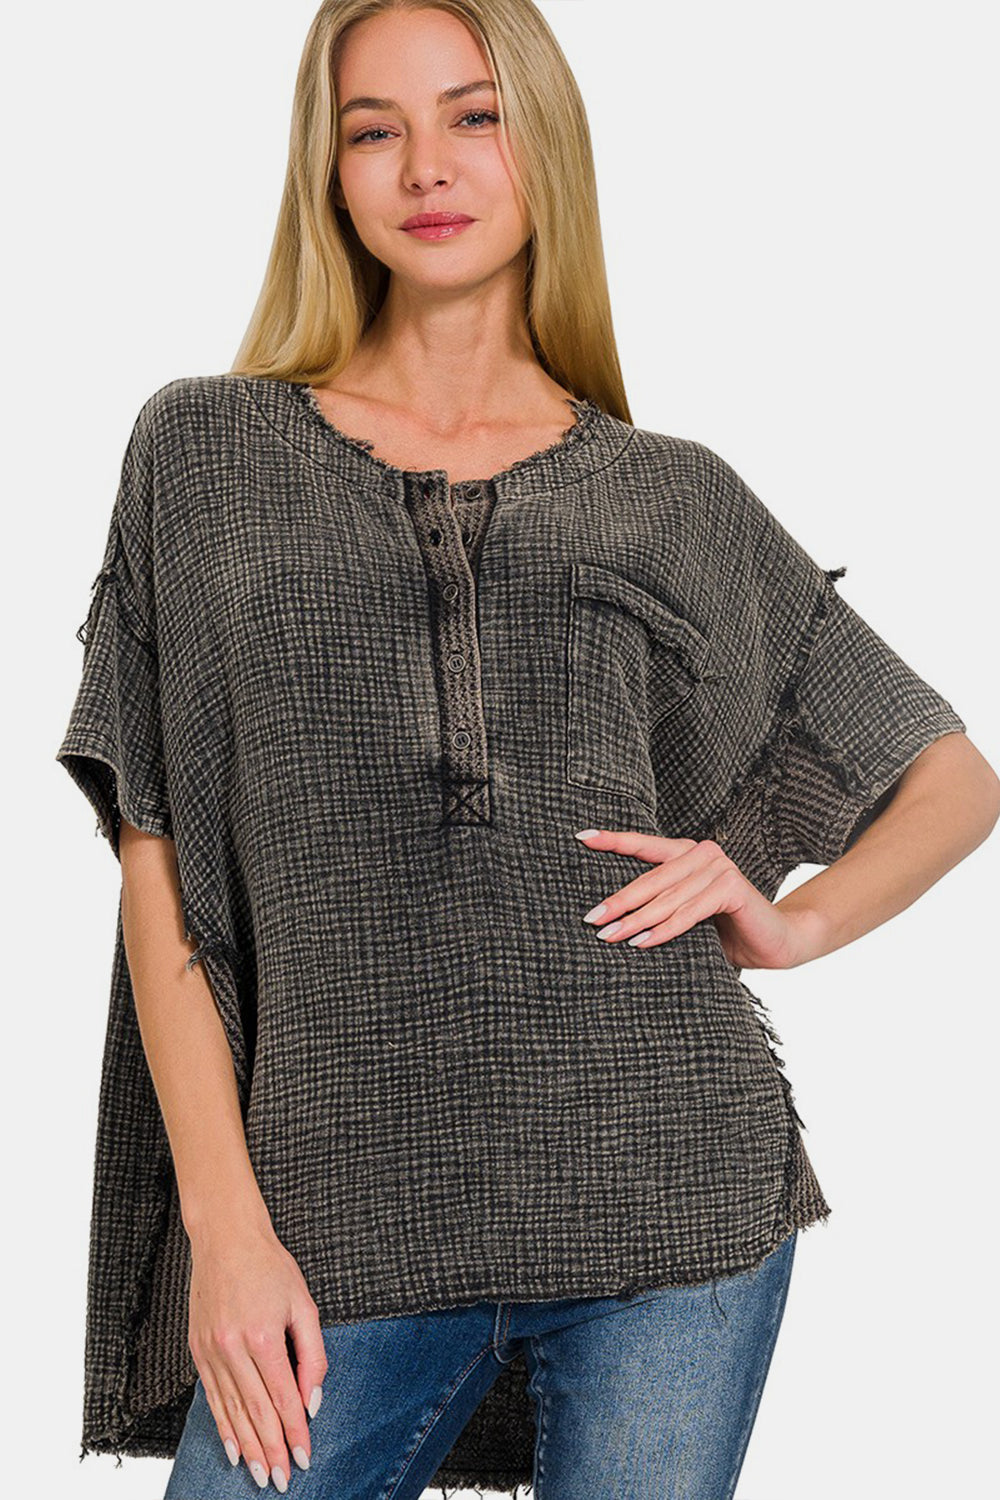 Edgy Basics Washed Texture Cotton Top - Joy & Country